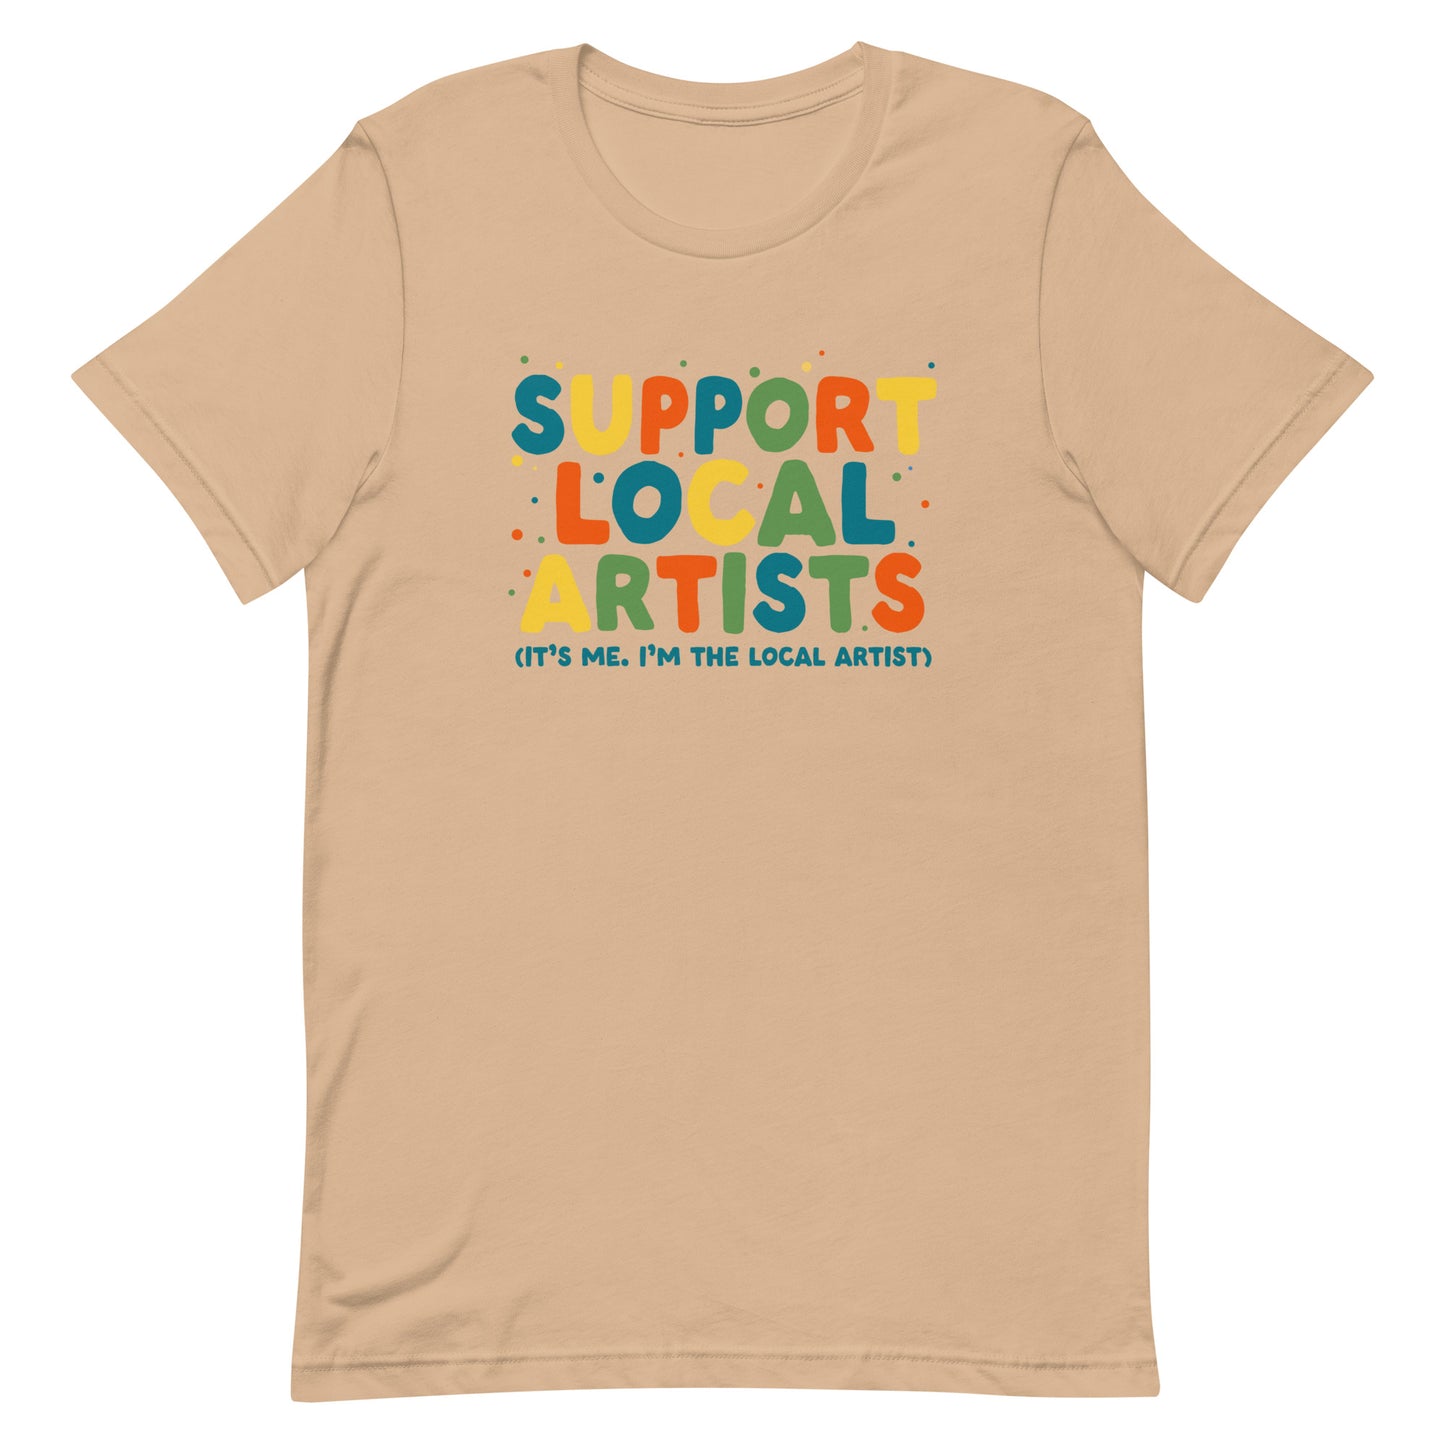 A tan crewneck t-shirt with bold, colorful text that reads "Support Local Artists (It's me. I'm the local artist)